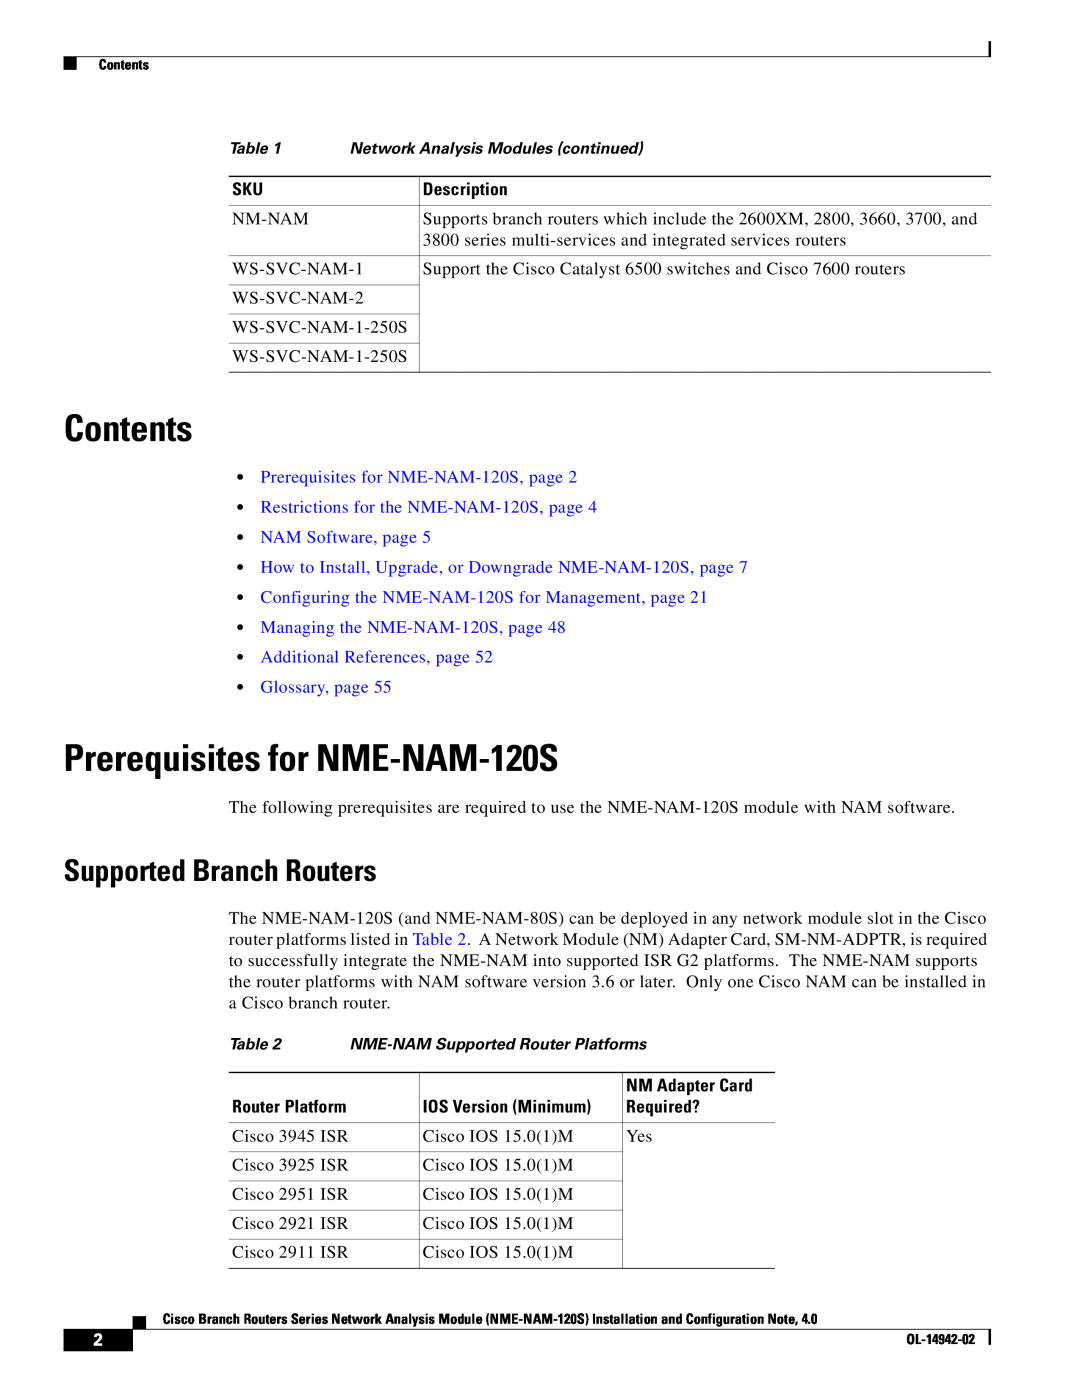 Cisco Systems SMNMADPTR Contents, Prerequisites for NME-NAM-120S, Supported Branch Routers, Glossary, page, Required? 